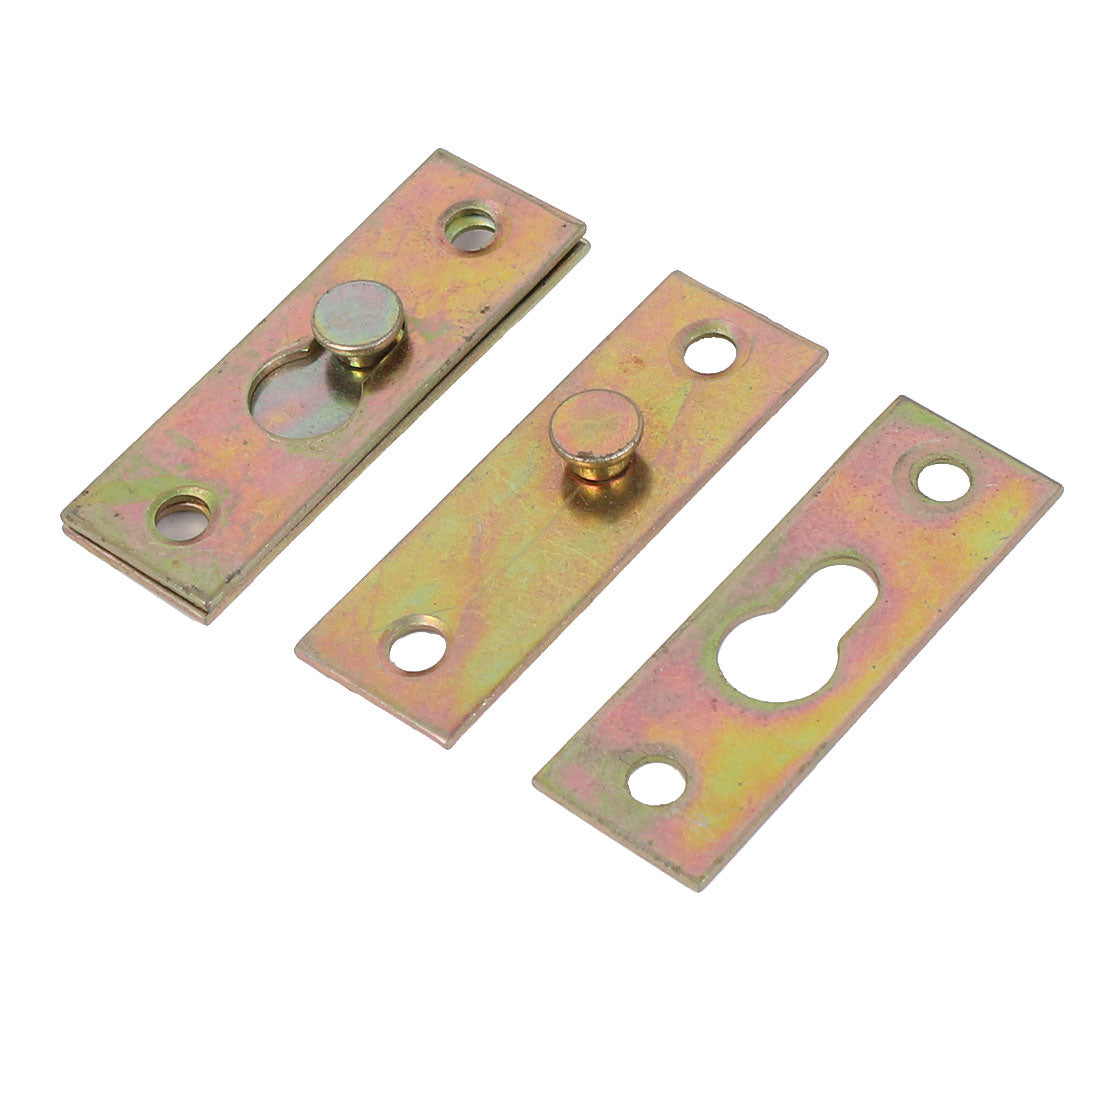 uxcell Uxcell Furniture Bed Rail Hook Plate Bracket Connector Brass Tone 8pcs